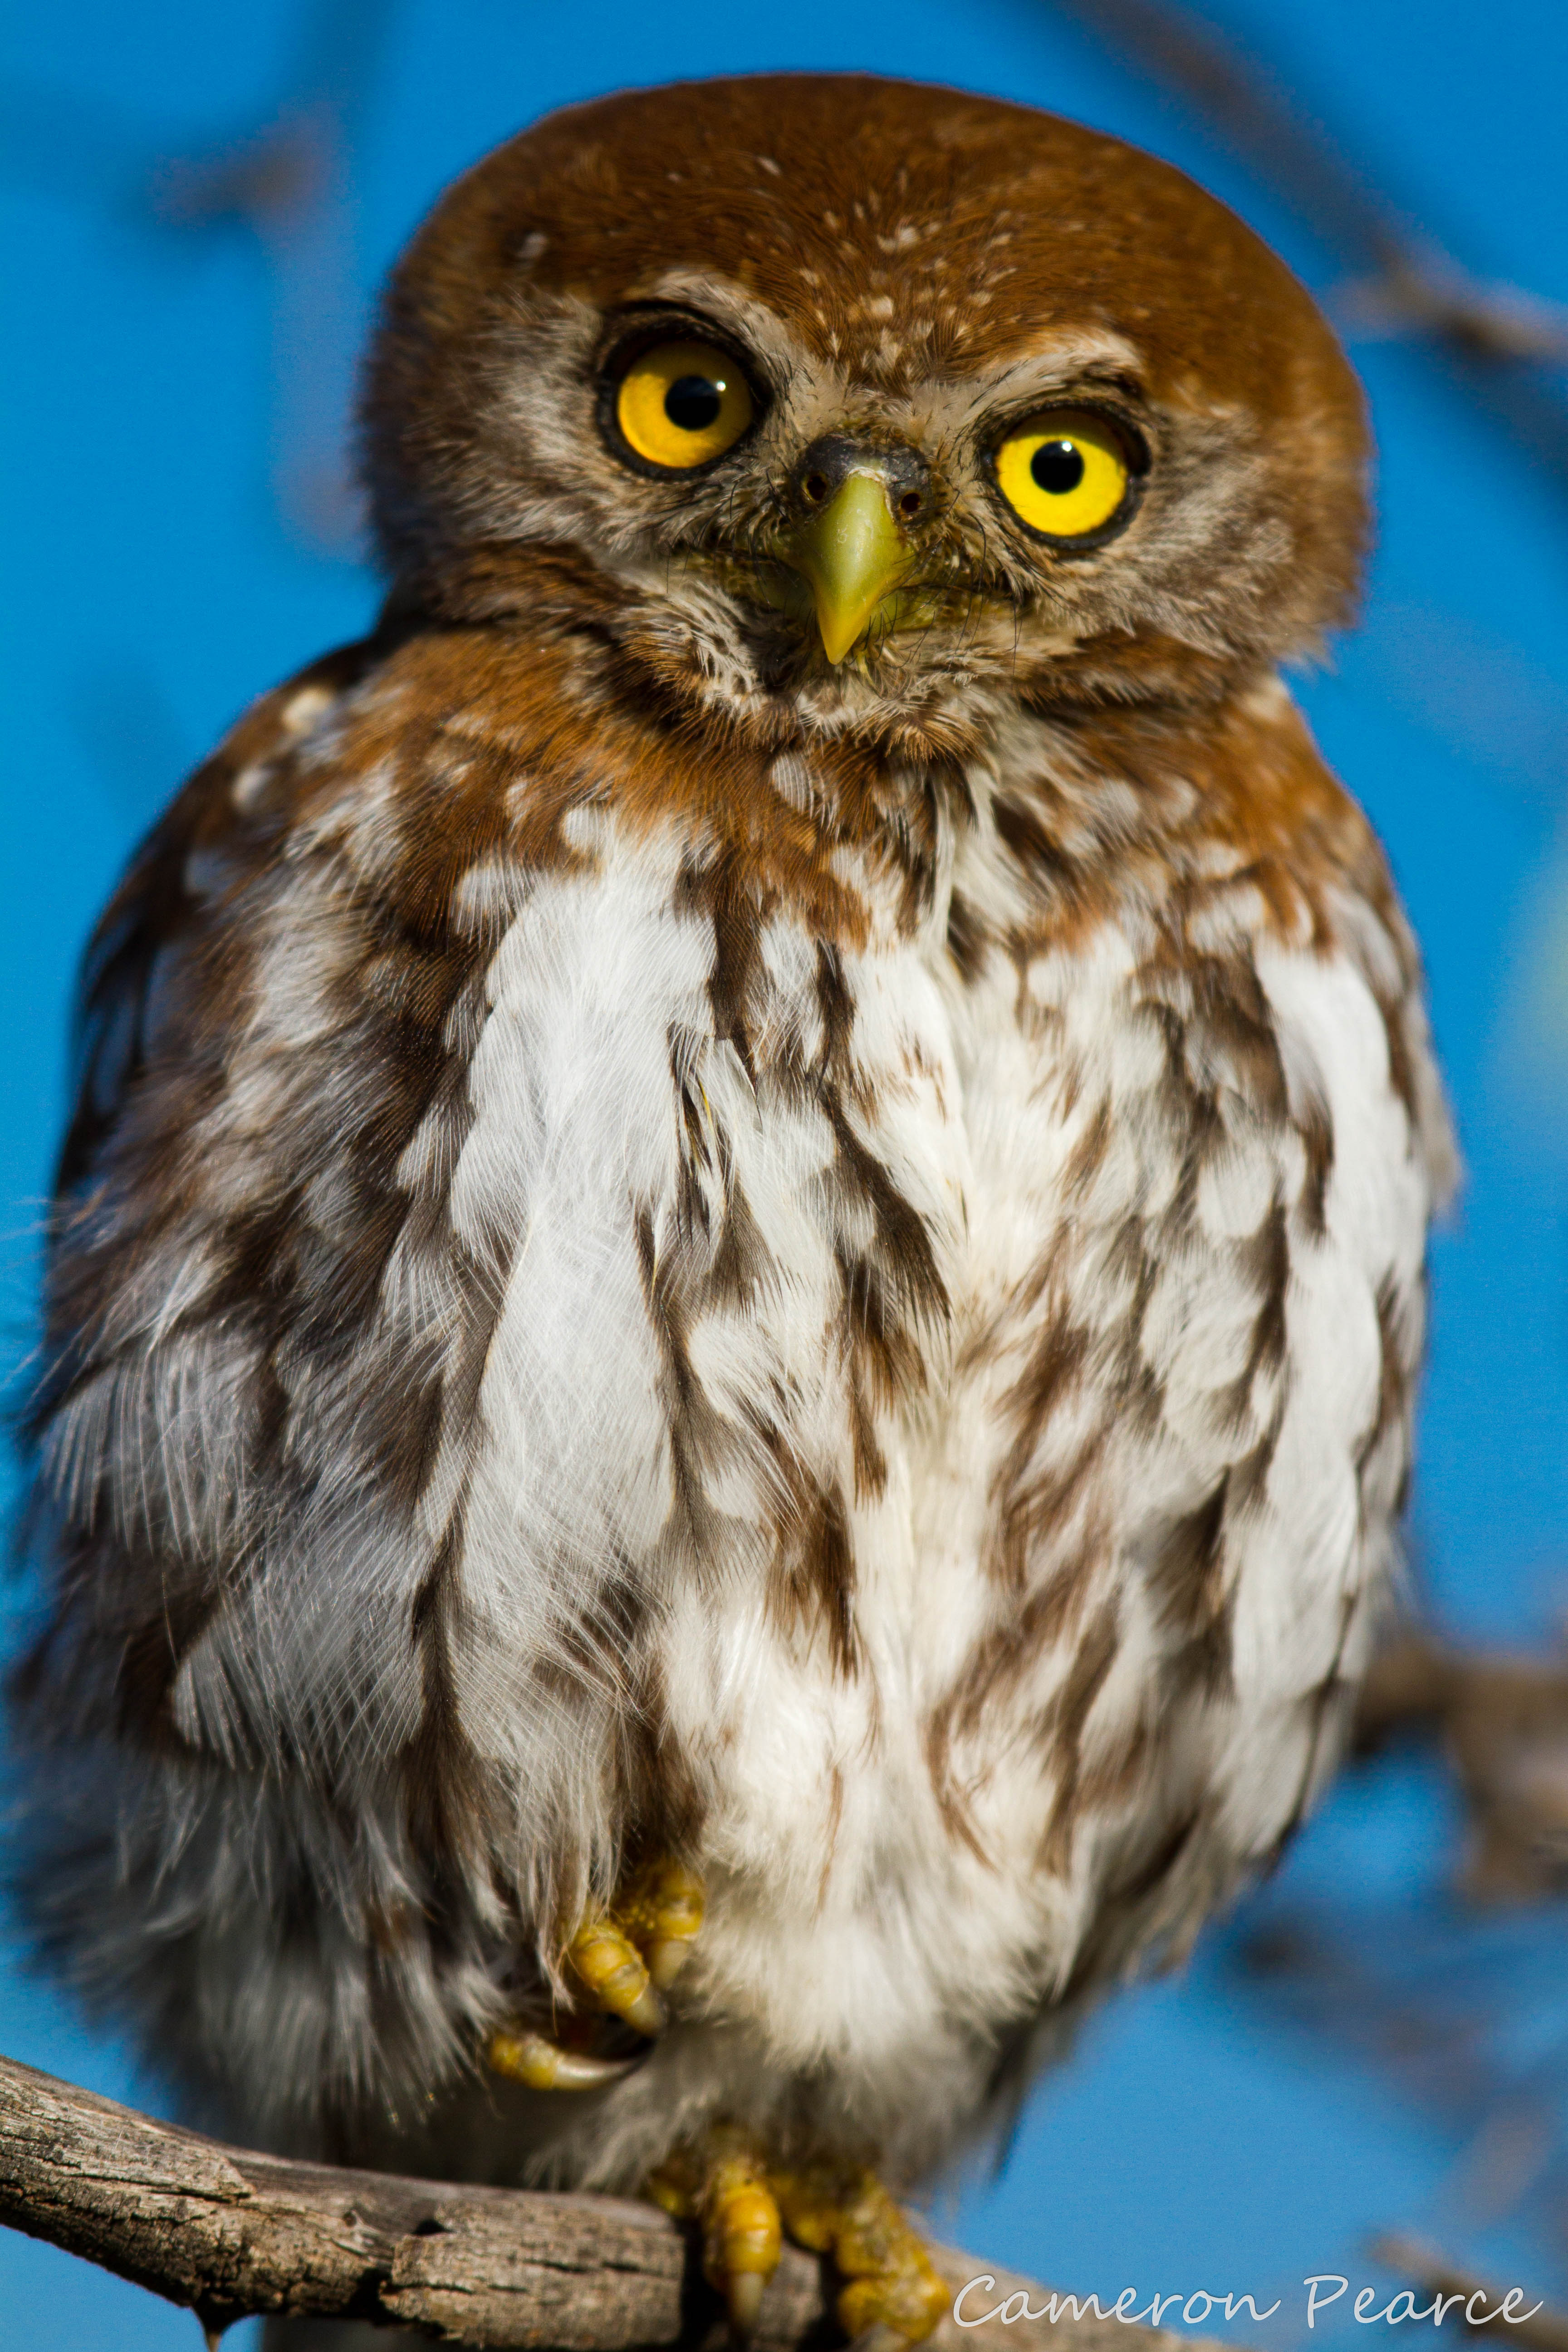 Pretty Pearl-spotted owlet